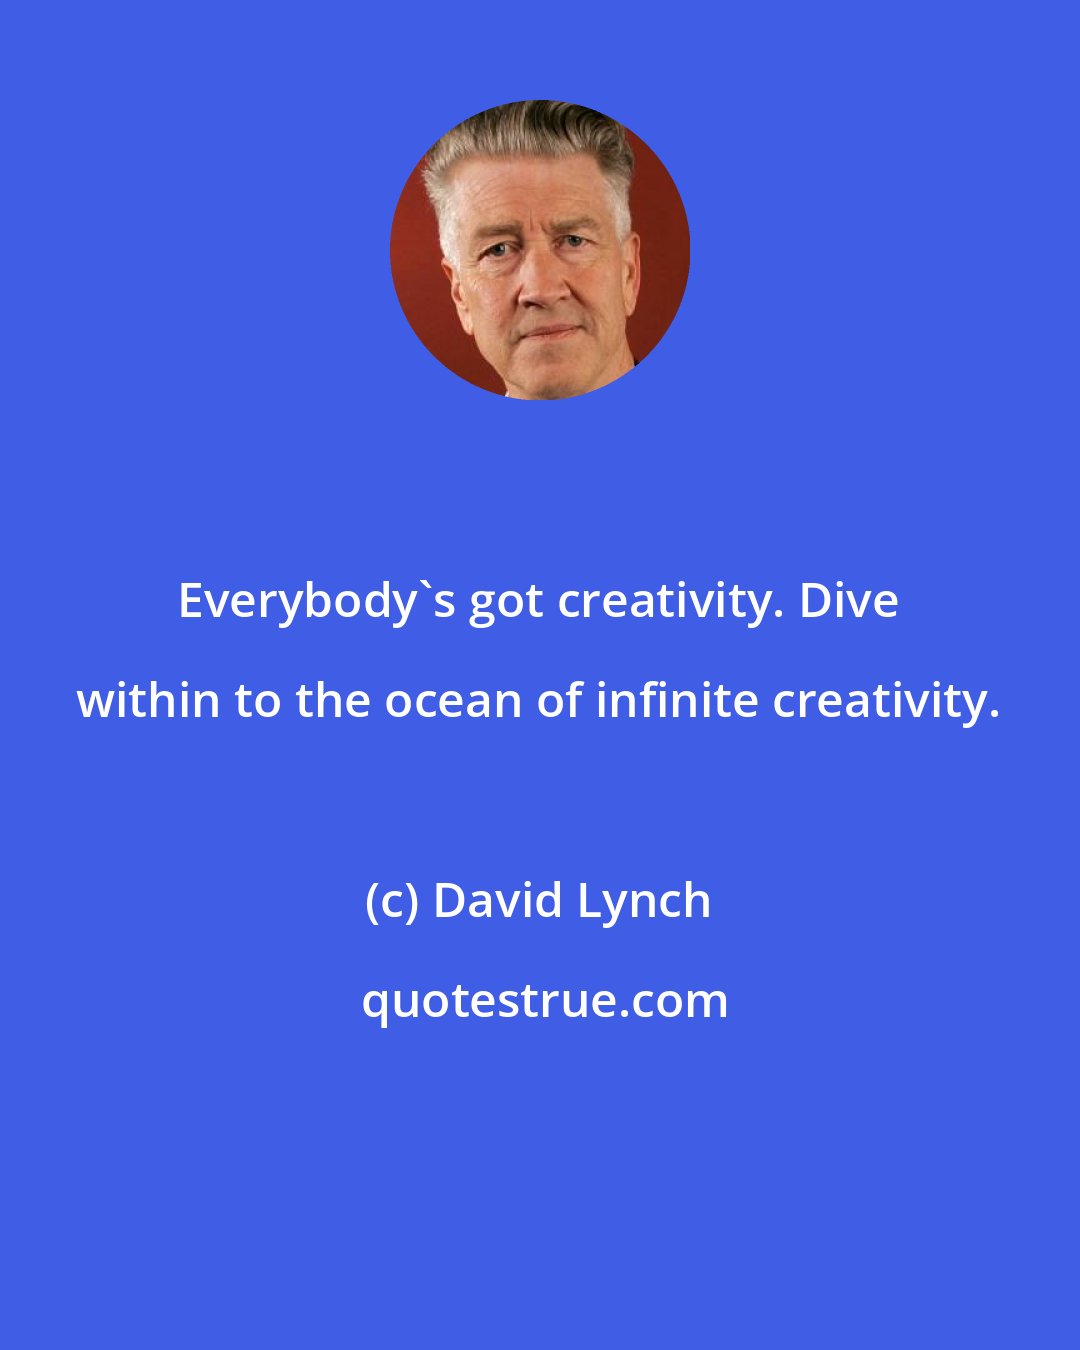 David Lynch: Everybody's got creativity. Dive within to the ocean of infinite creativity.